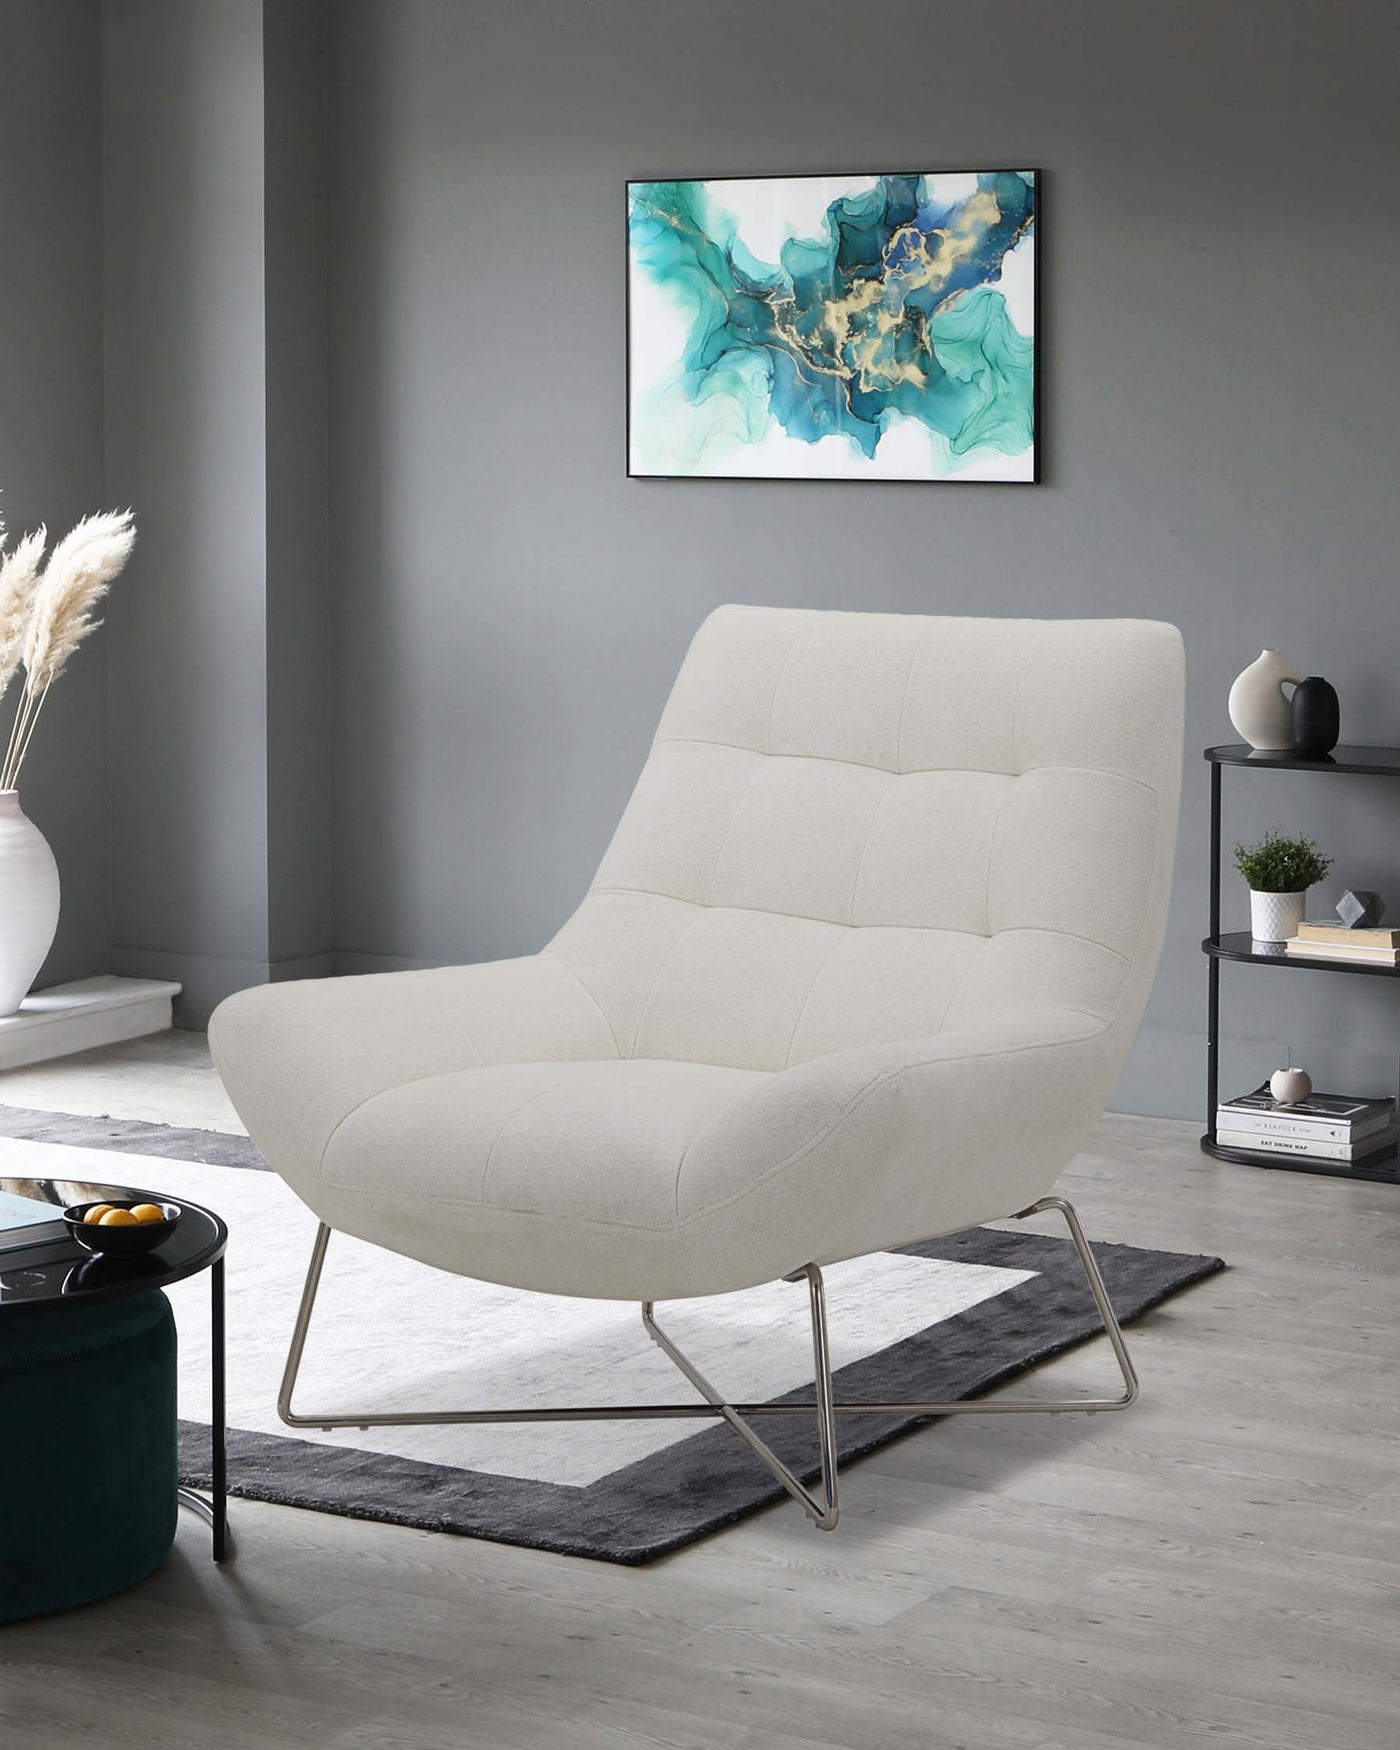 Modern beige upholstered lounge chair with unique curved silhouette and quilted detailing, supported by thin chrome legs, displayed on a grey and black area rug in a contemporary styled room.